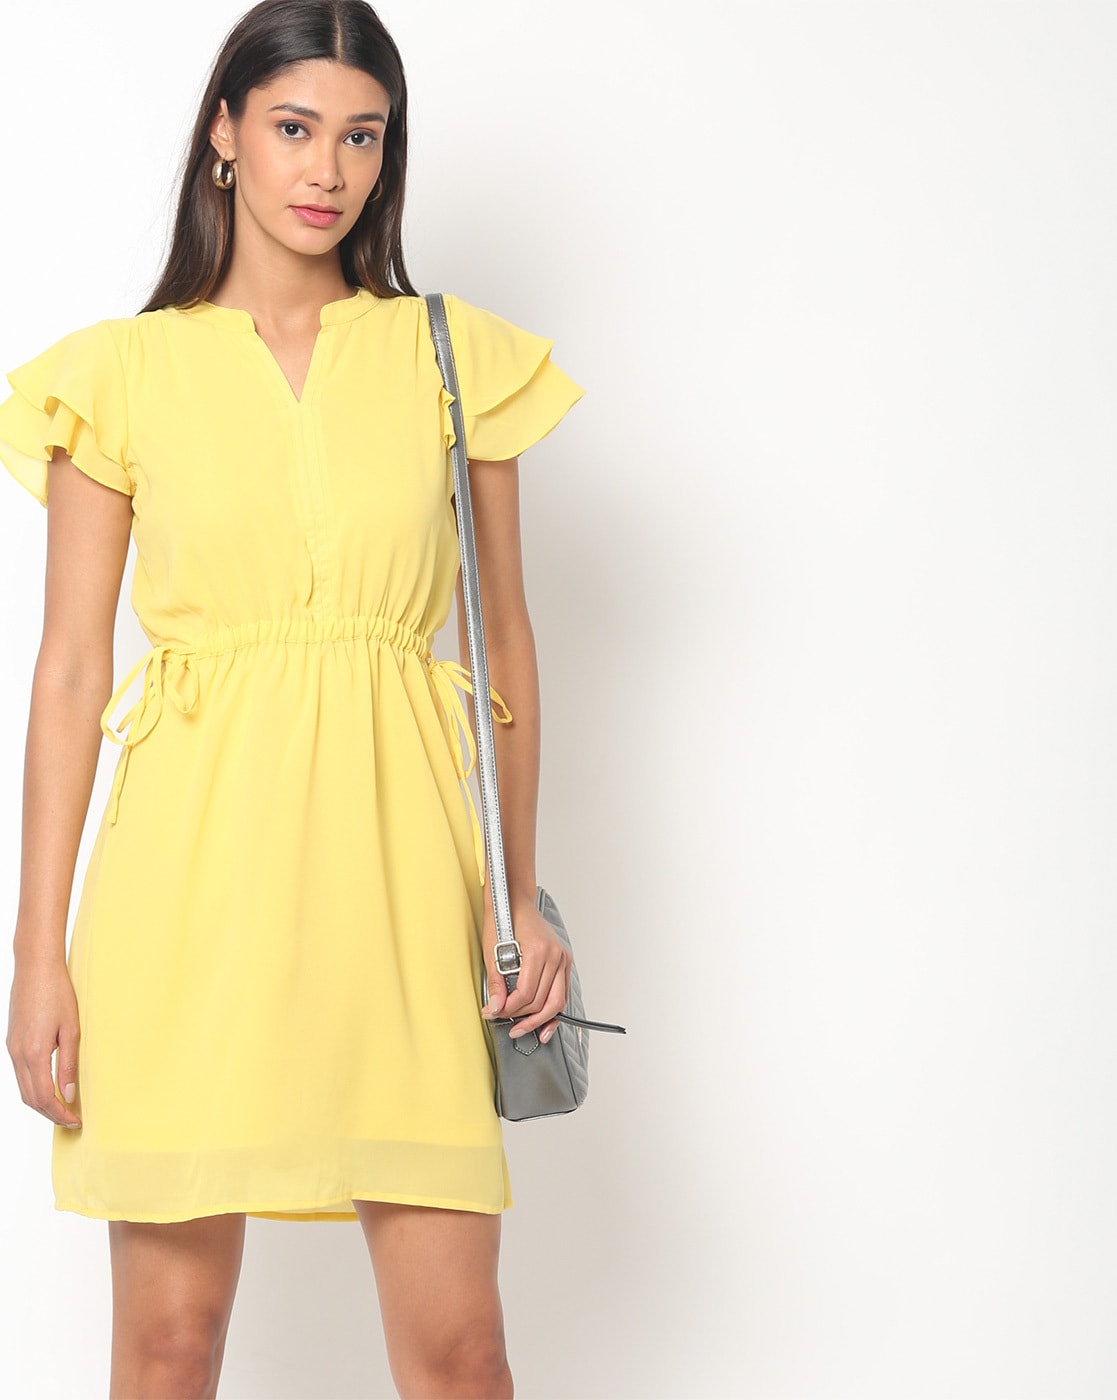 Top more than 134 yellow dress with sleeves best - seven.edu.vn